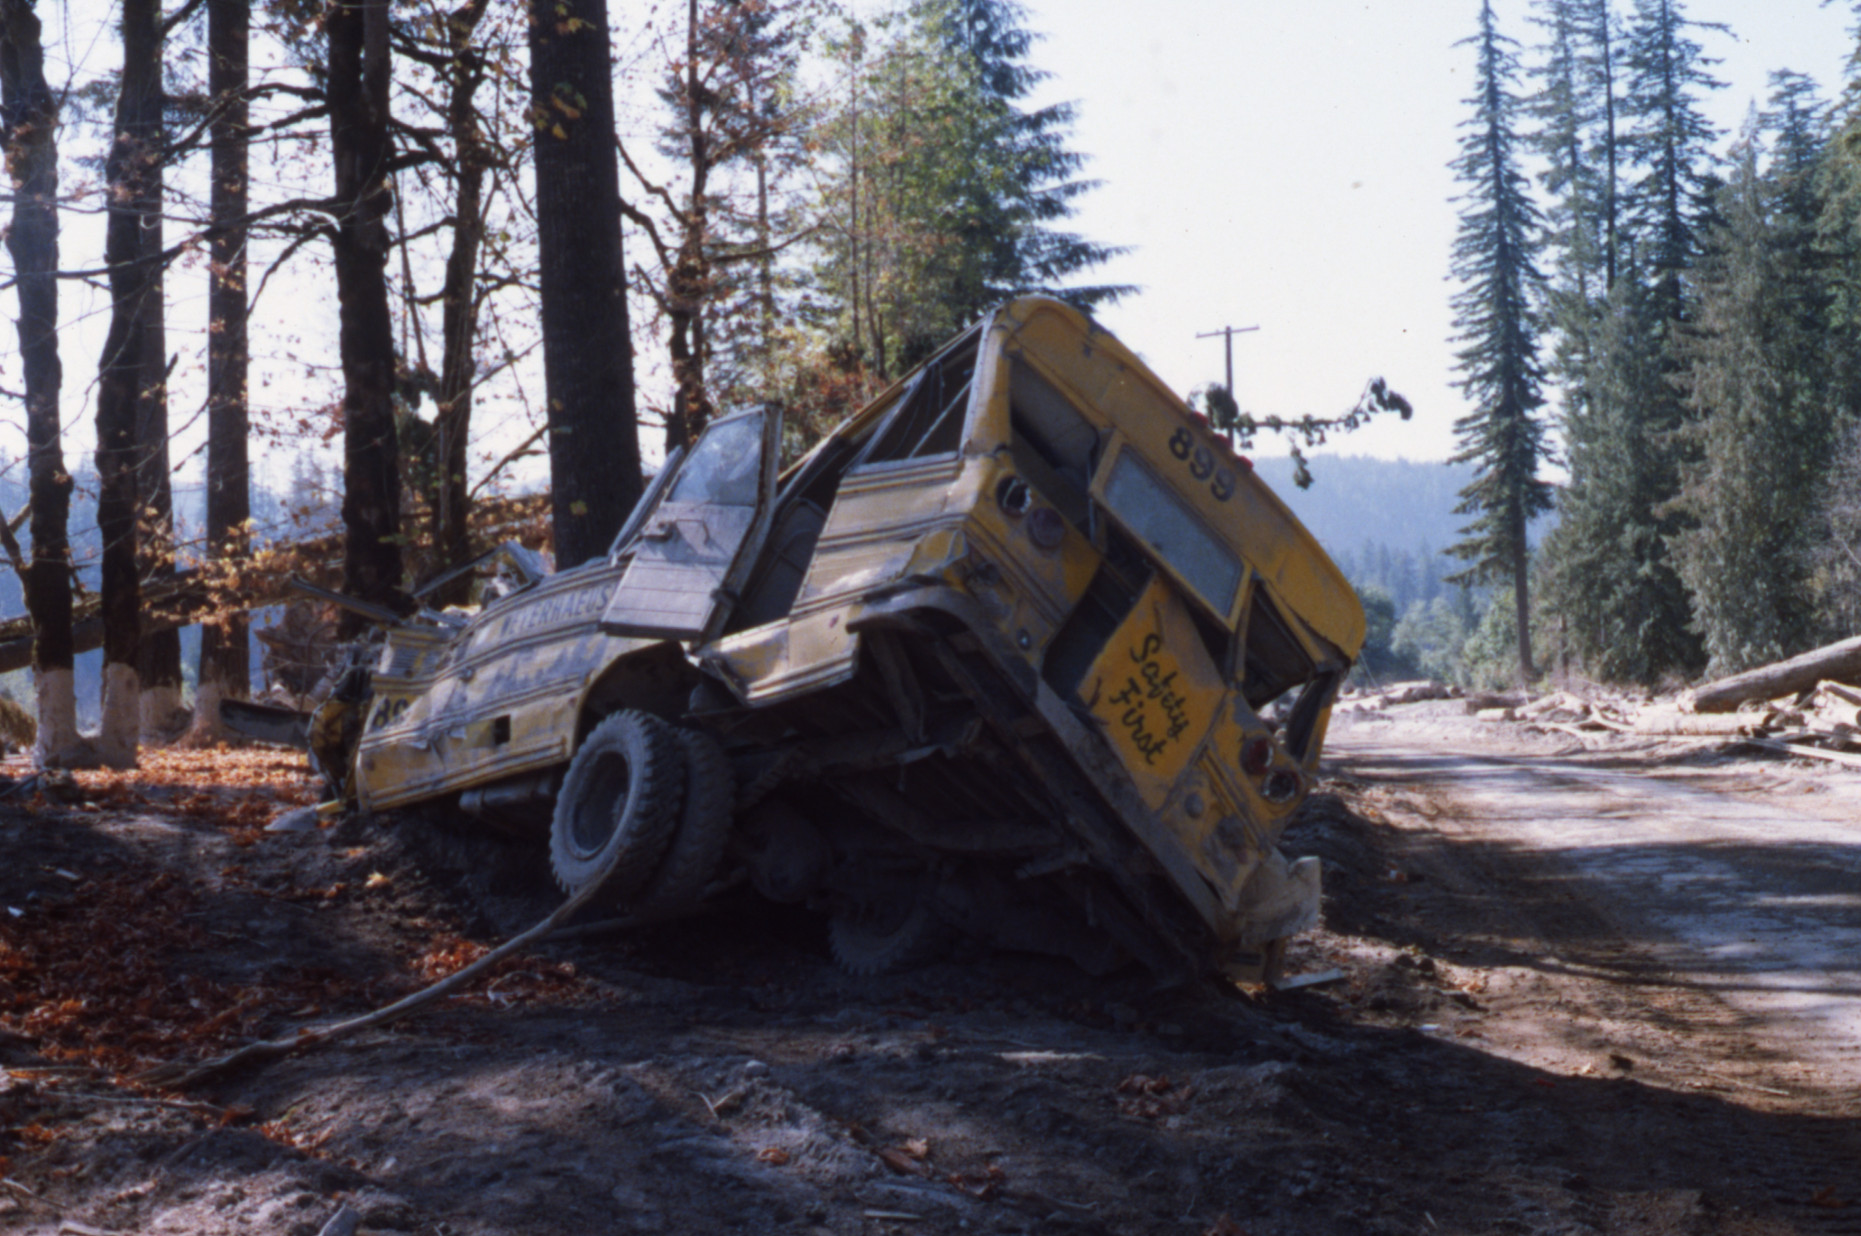 Vehicle destroyed by Mount St. Helens' eruption, 1980